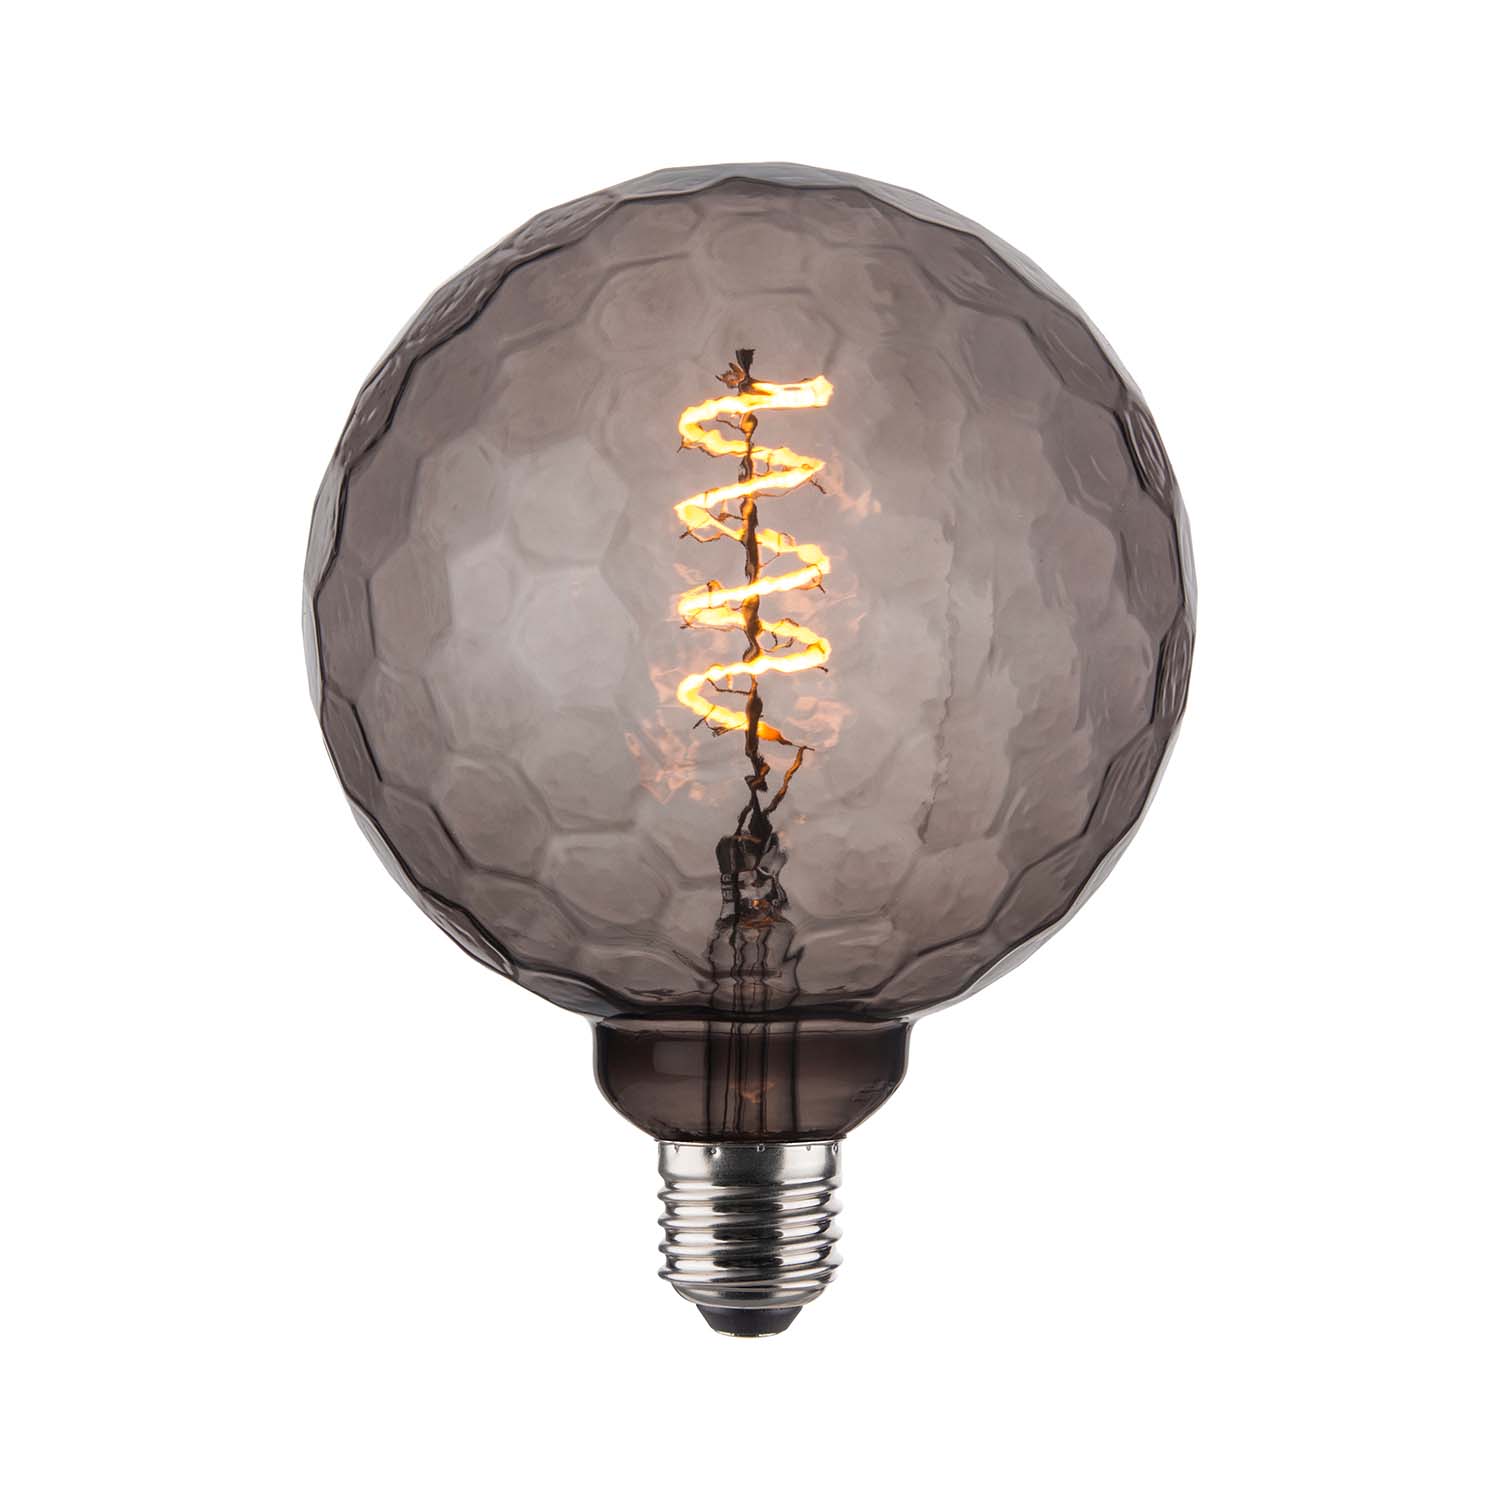 Geo - E27 LED bulb with hammered effect